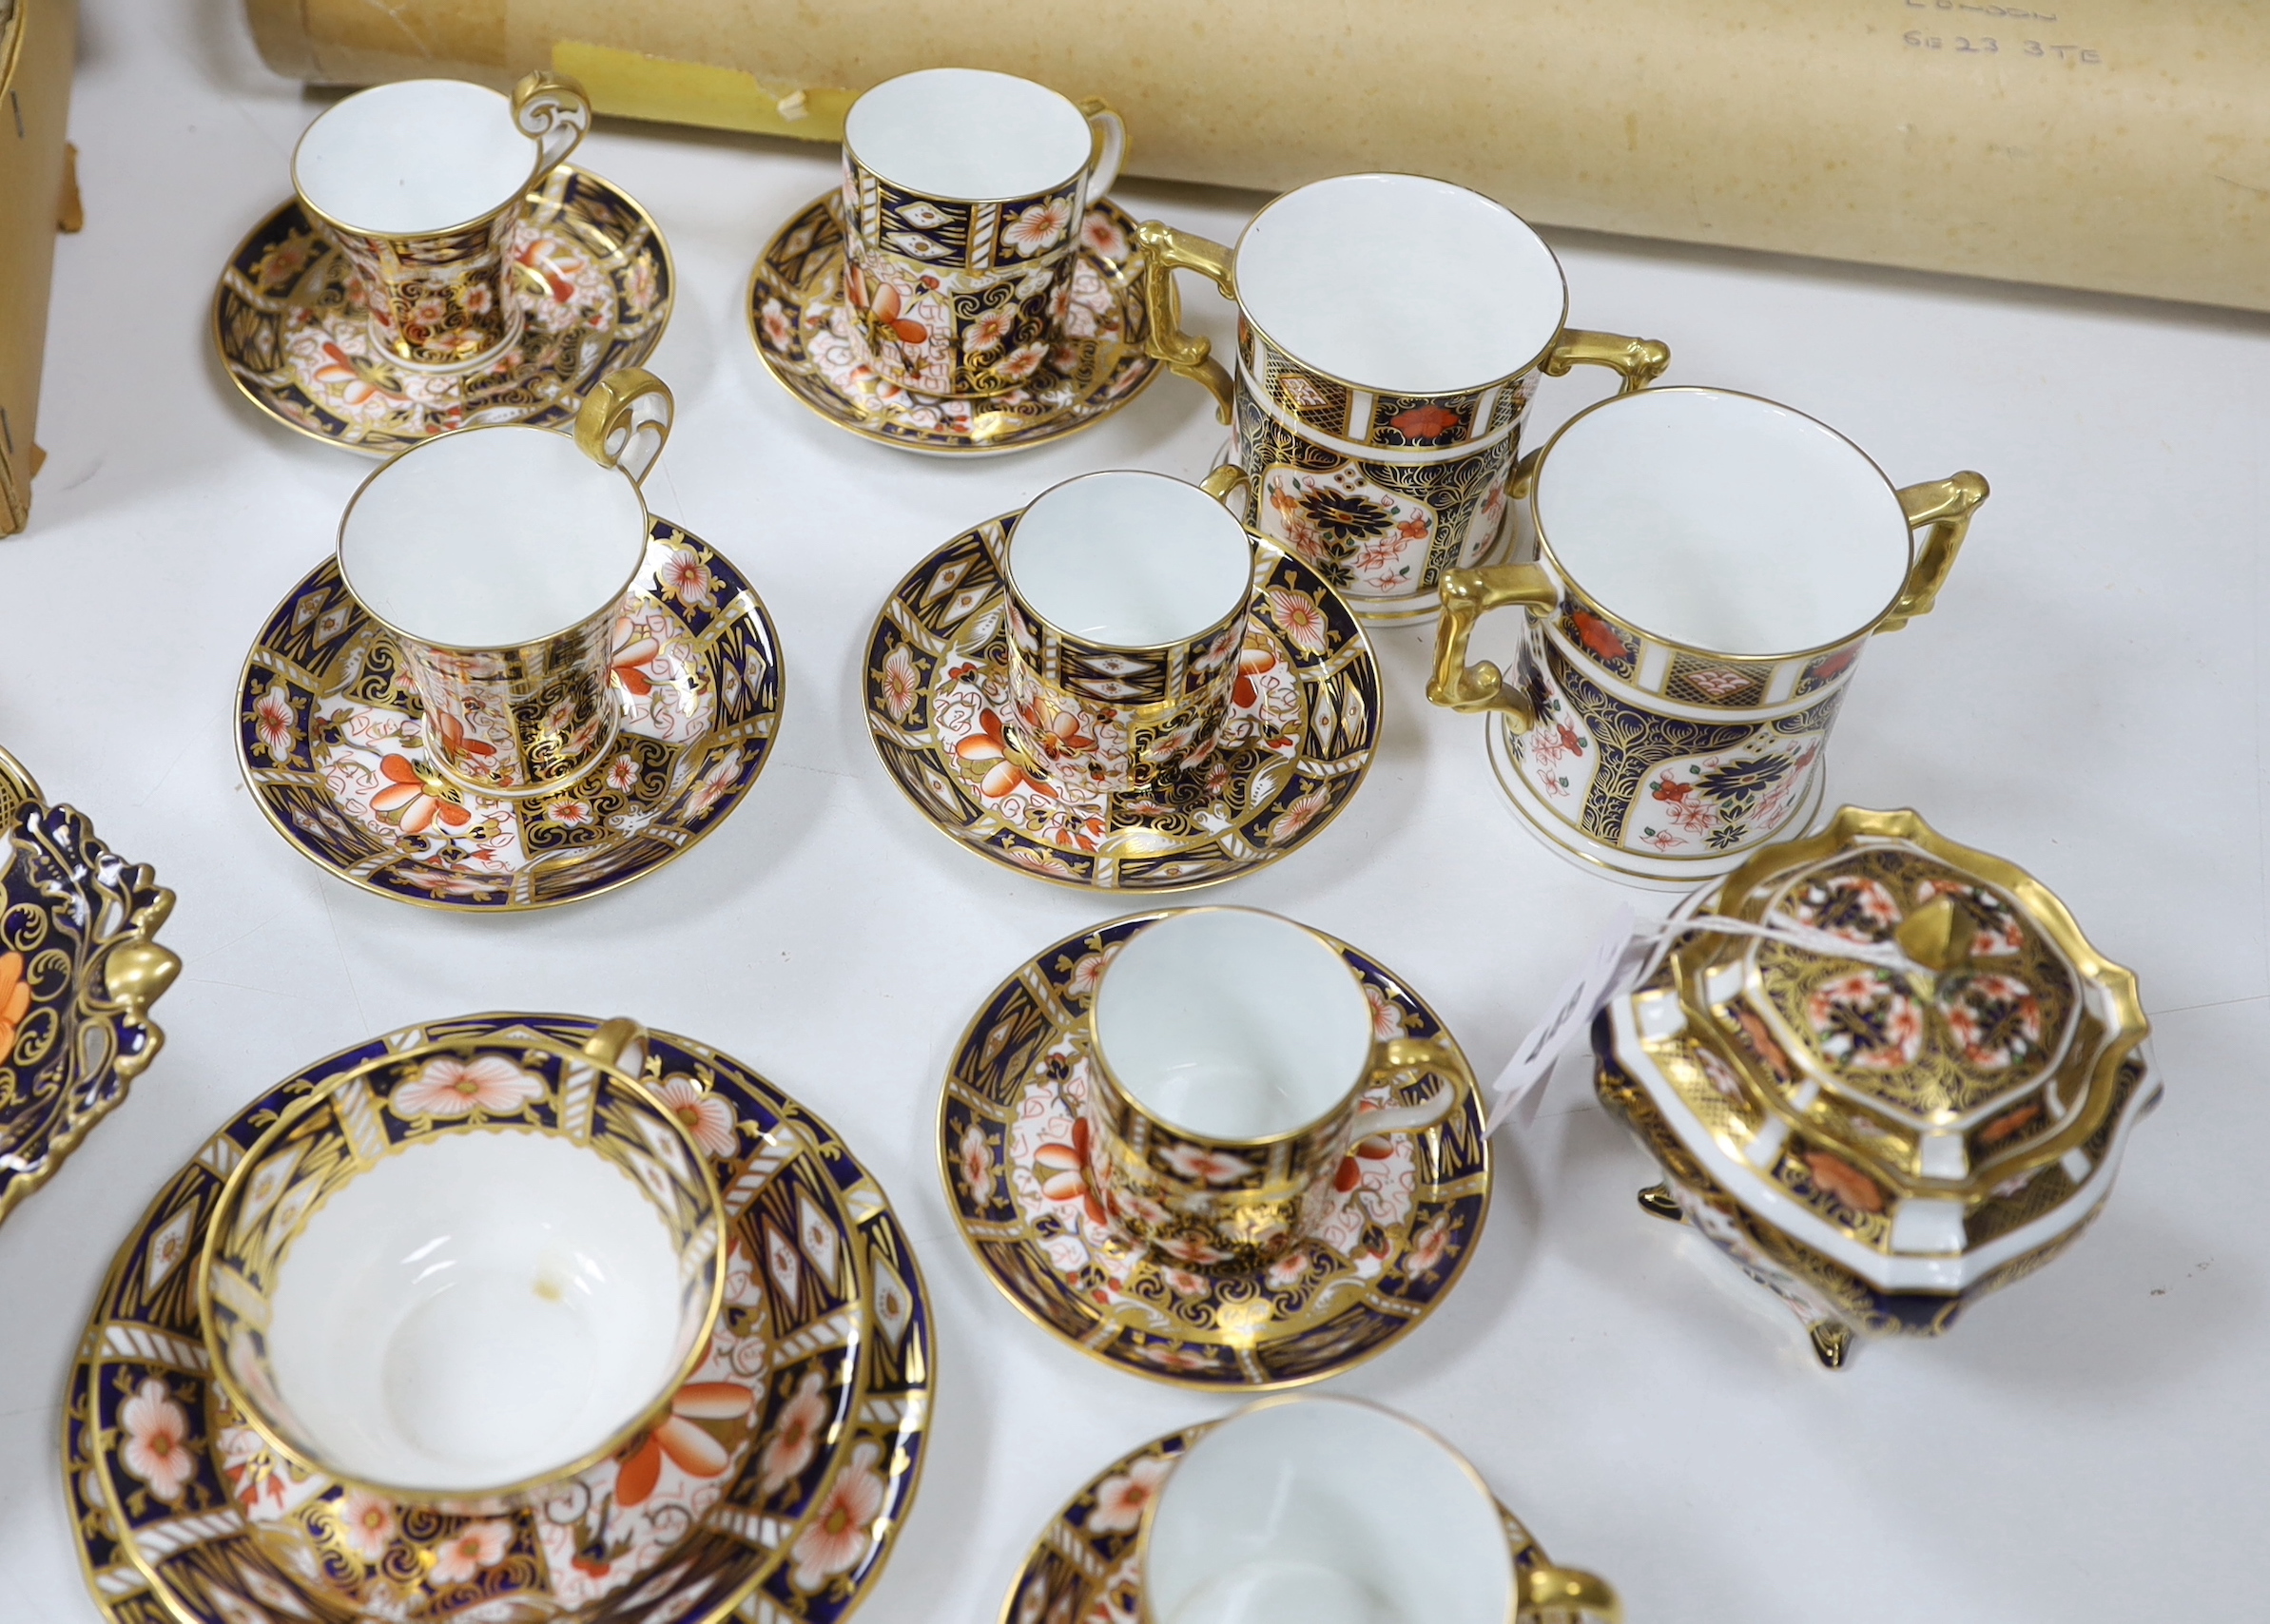 A collection of Royal Crown Derby Imari porcelain, largest 27cm in diameter